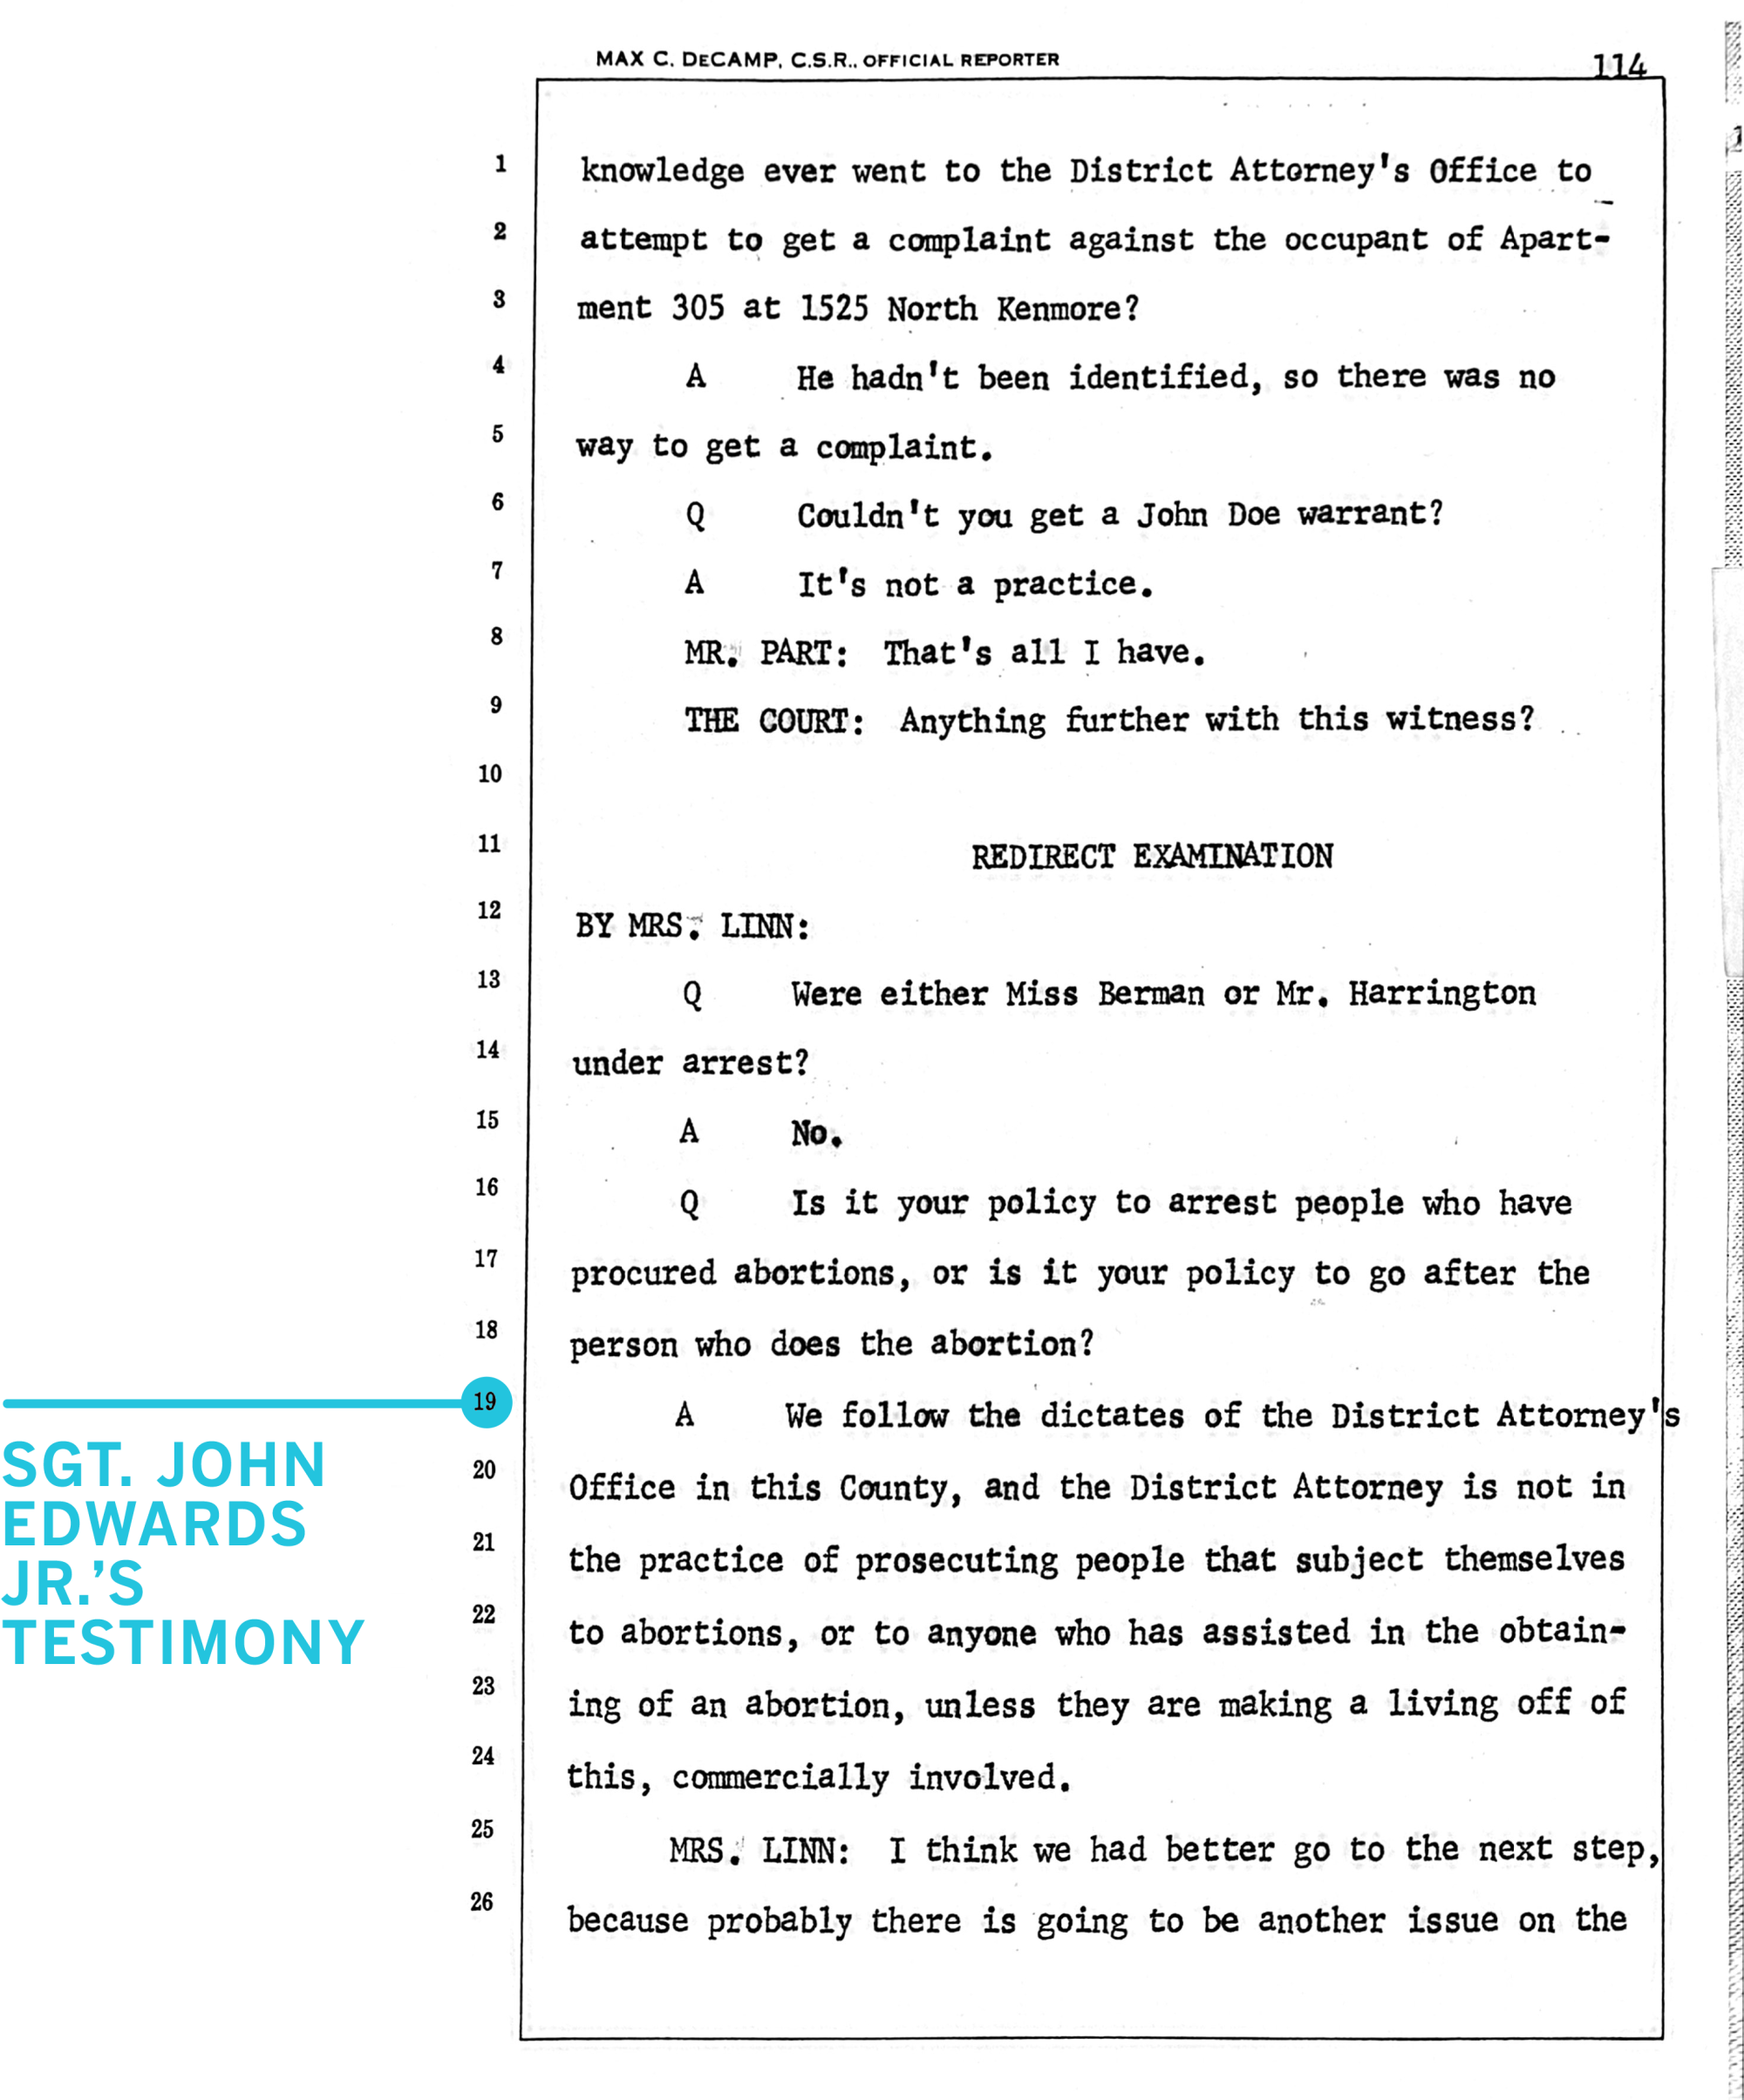 A page of court testimony. "The DA is not in the practice of prosecuting people that subject themselves to abortions"